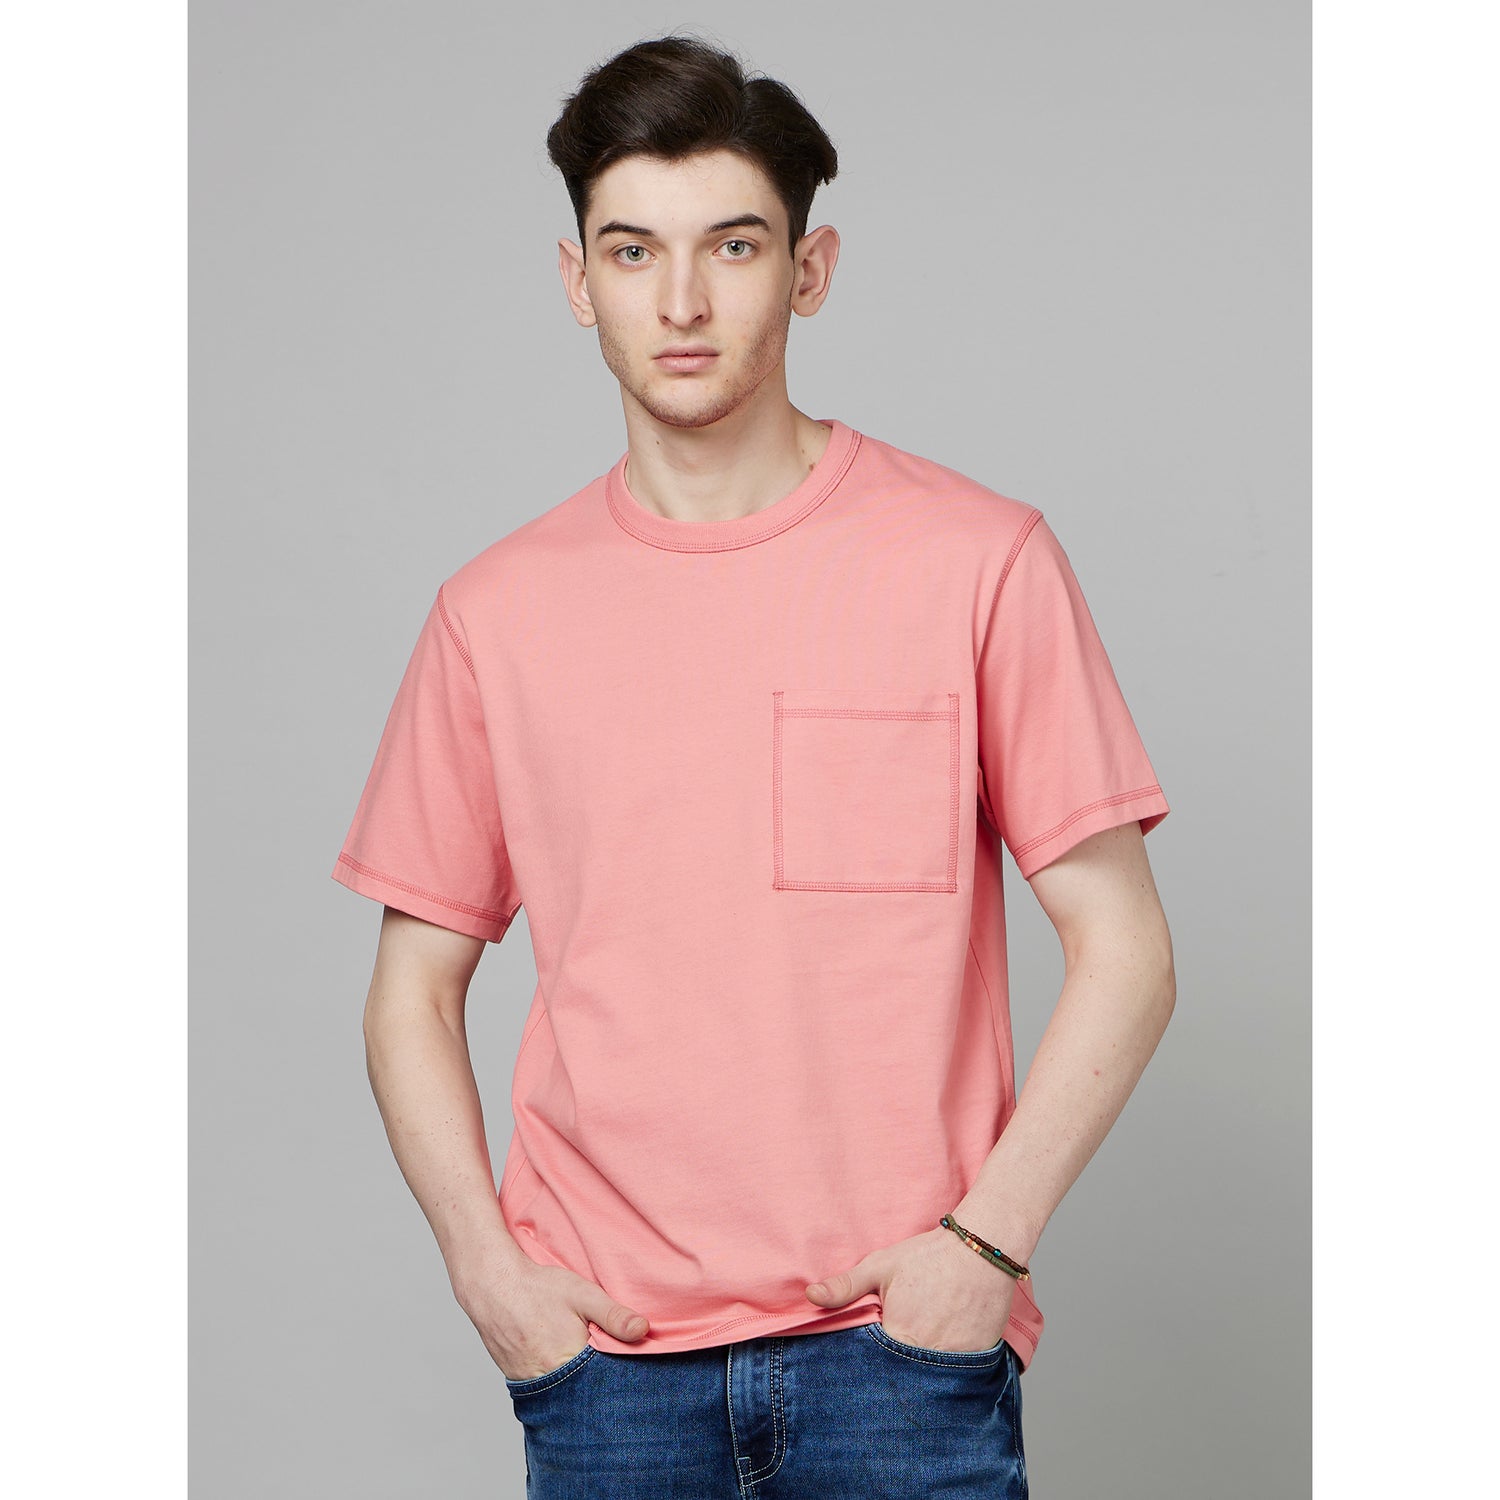 Pink Round Neck Cotton Casual T-Shirt (FECONTRAST)